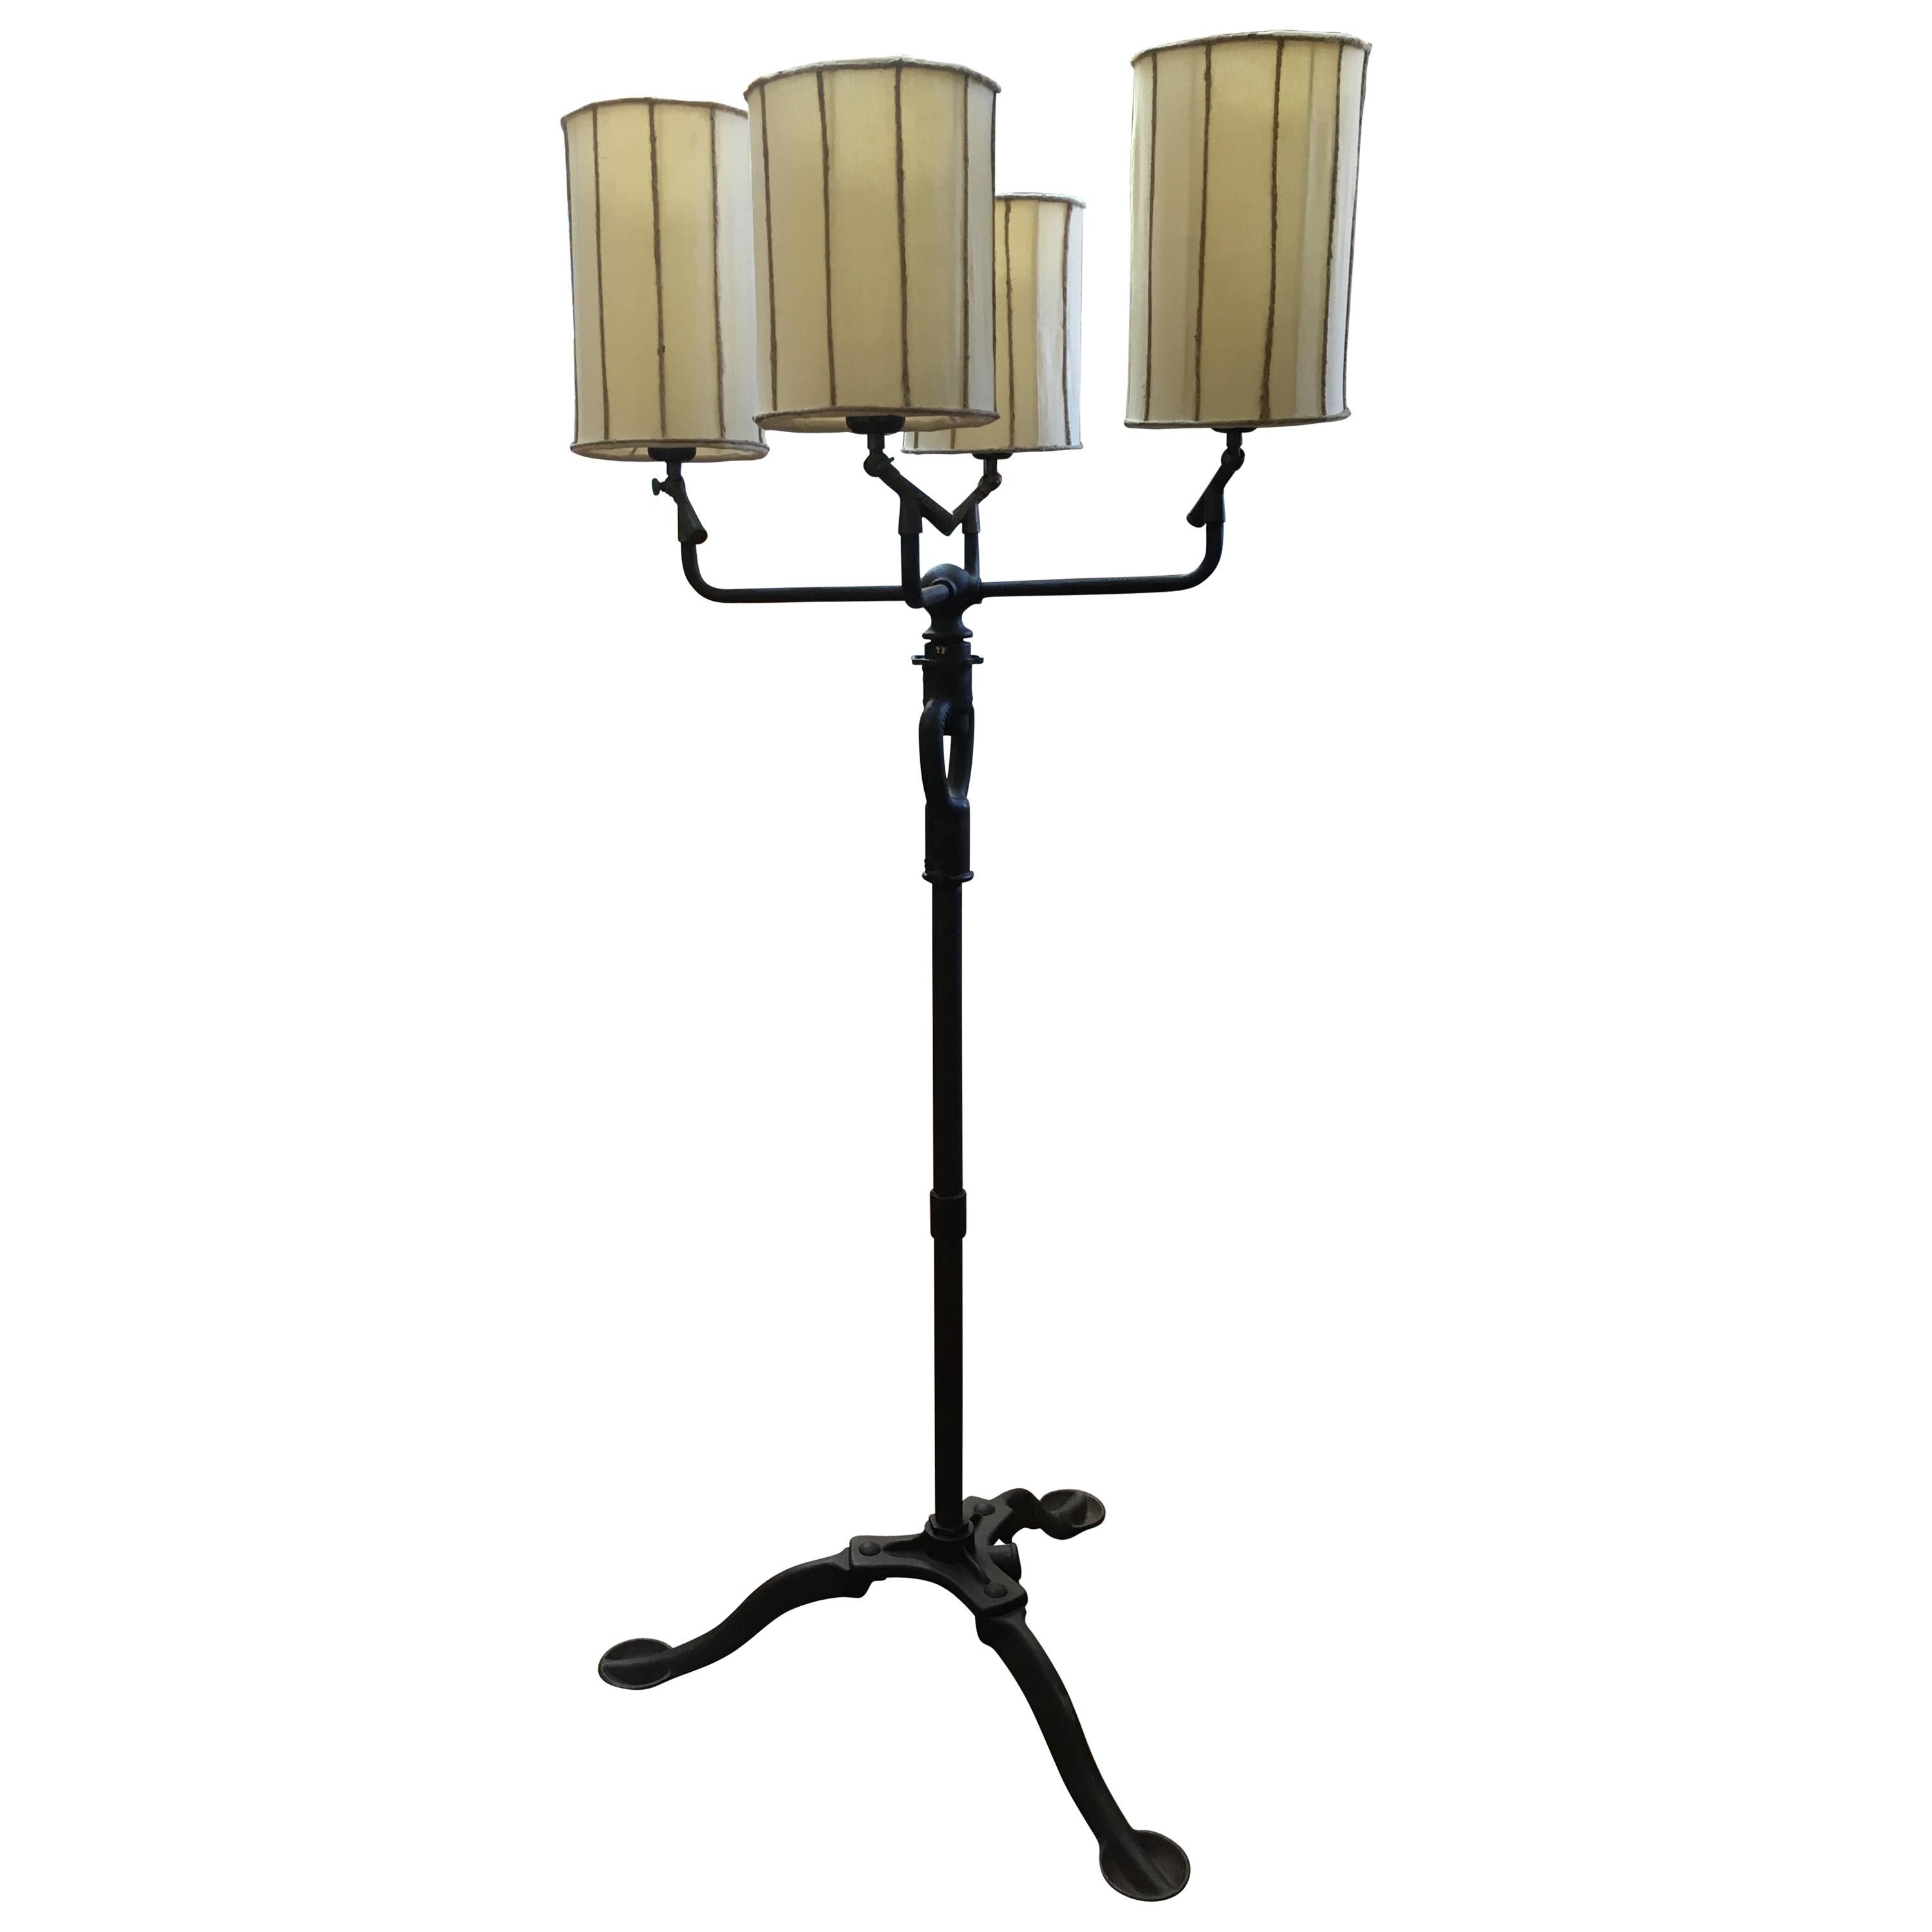 Italian Rust Iron Floor Lamp with Four Lights from 1950s